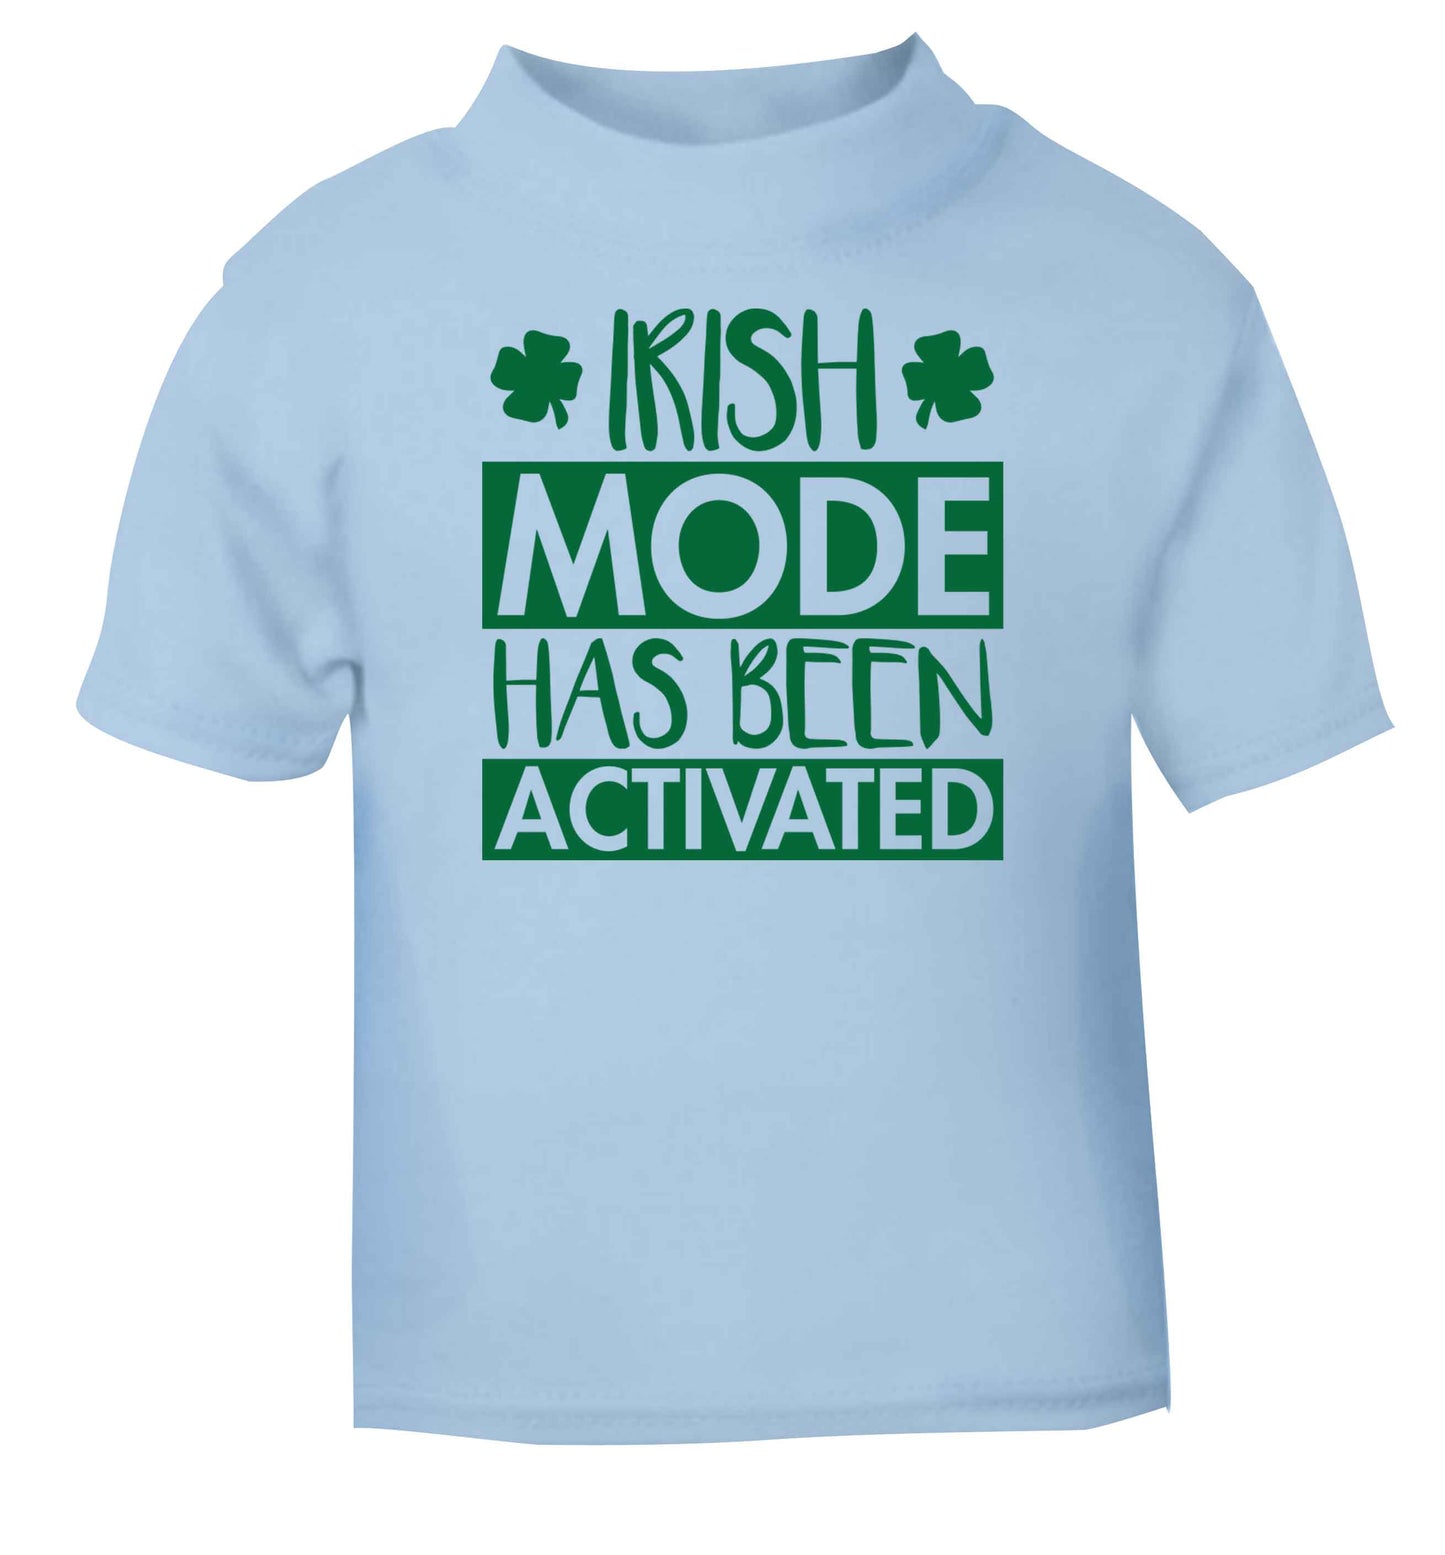 Irish mode has been activated light blue baby toddler Tshirt 2 Years